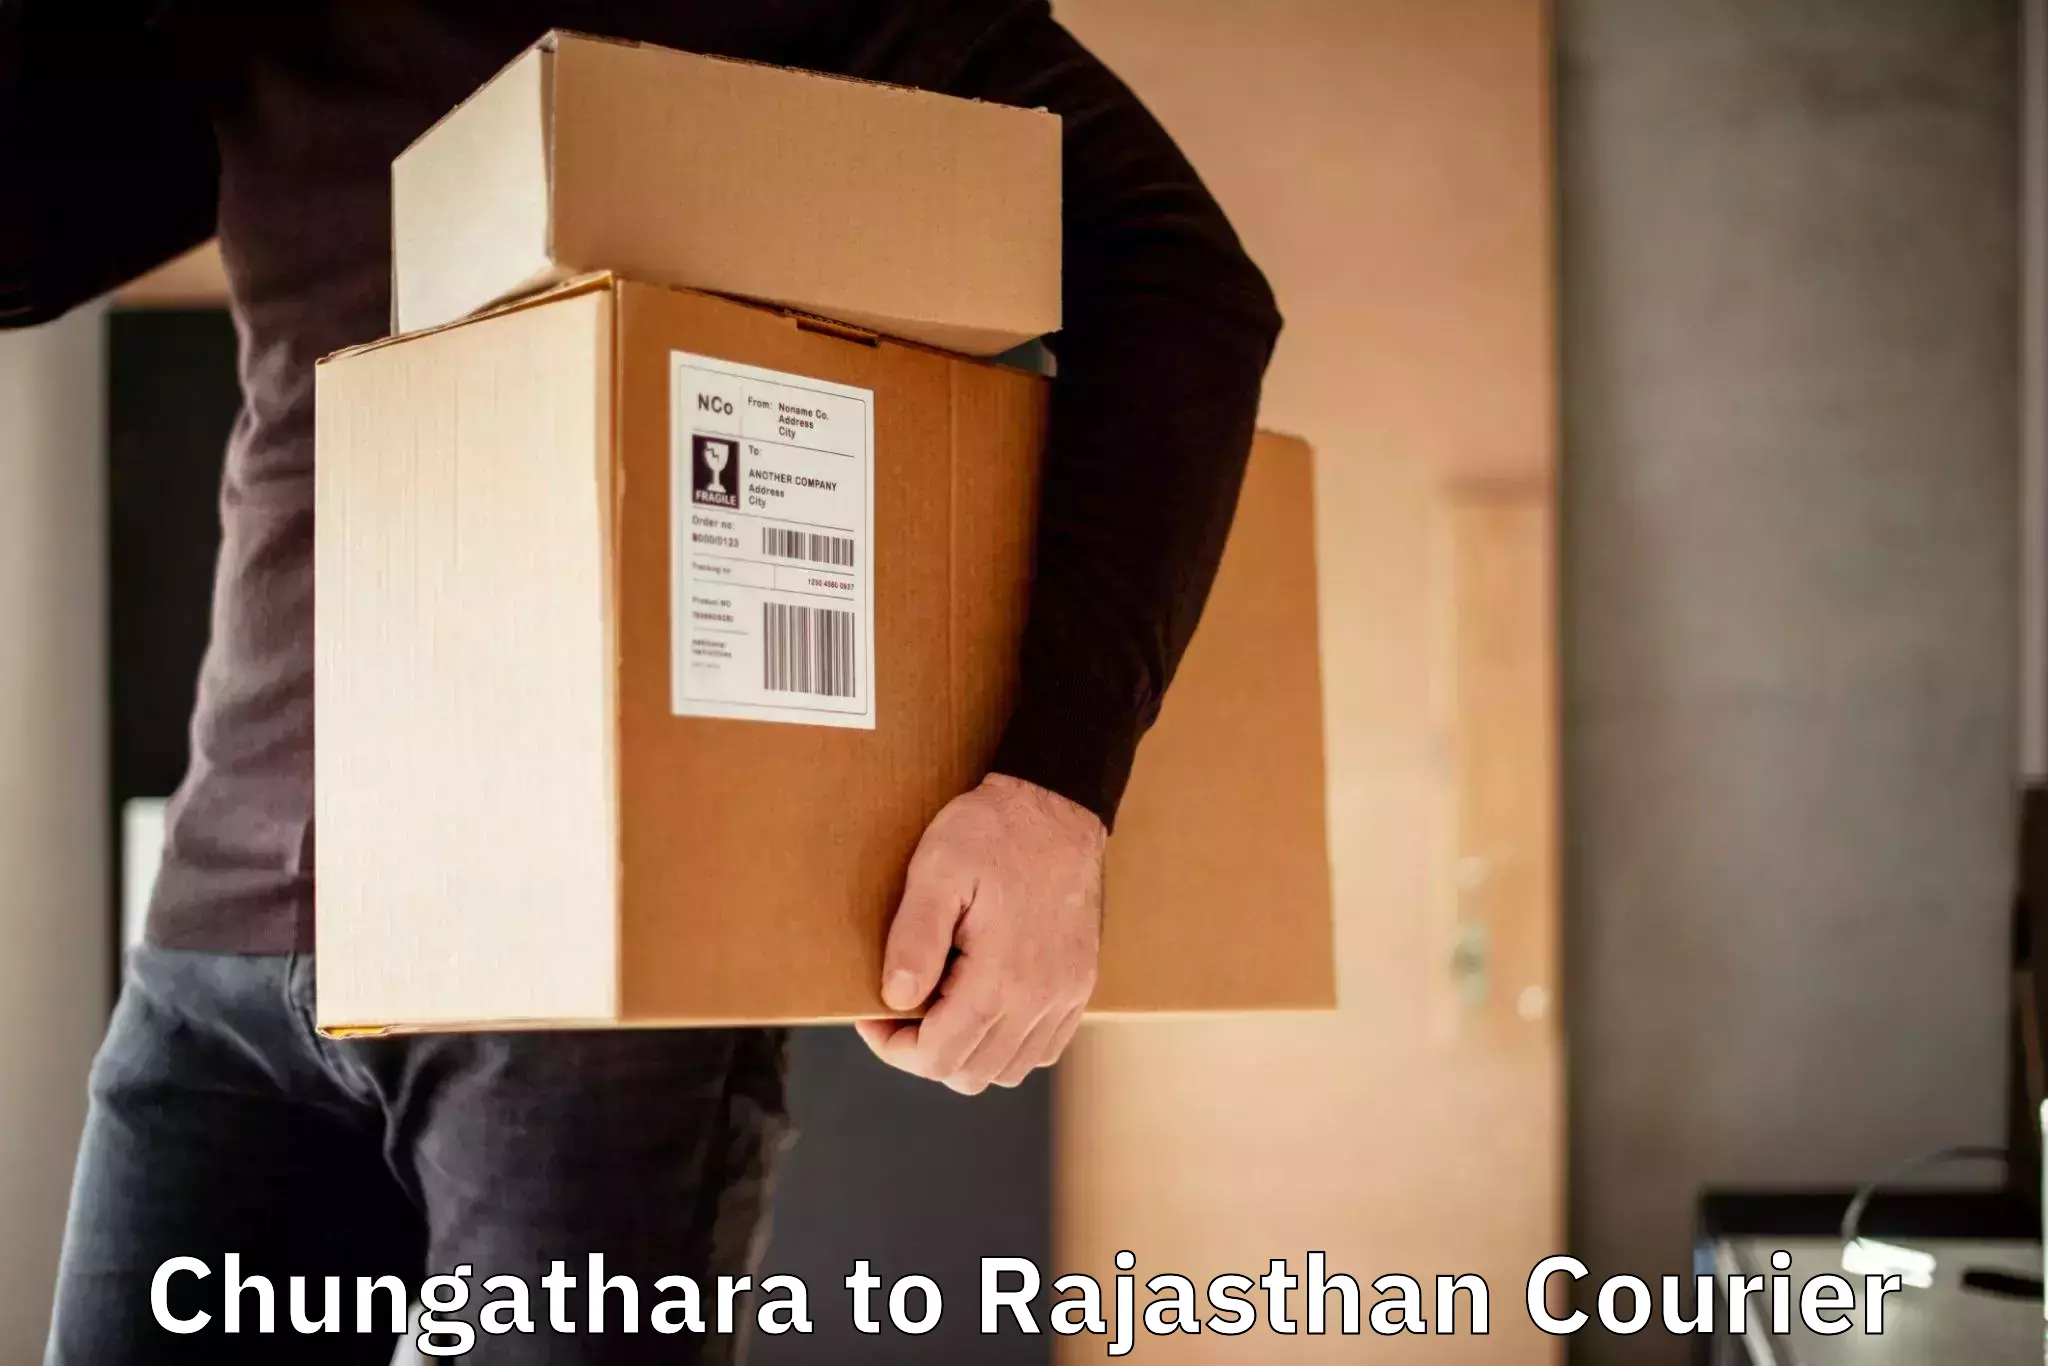 State-of-the-art courier technology Chungathara to Deenwa